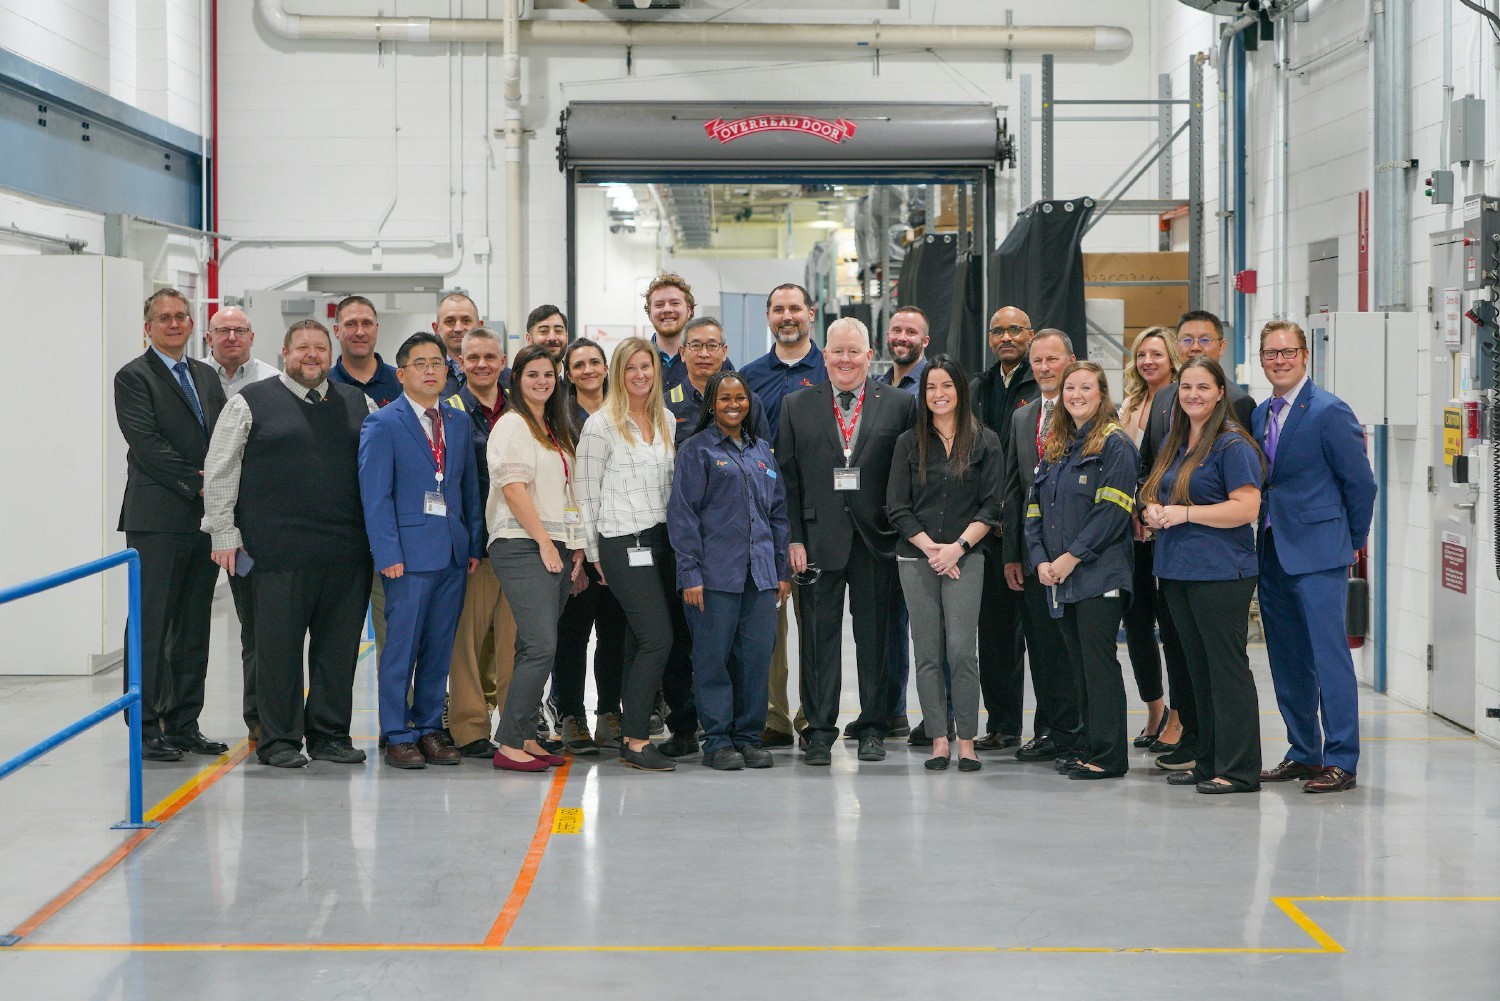 For the 10 year anniversary of the US/Korea free trade agreement (KORUS), SK Siltron css was chosen as the venue for the celebration that was held at our Auburn, Michigan manufacturing facility.  Pictured is the employee team who participated in the planning and execution of the event. 